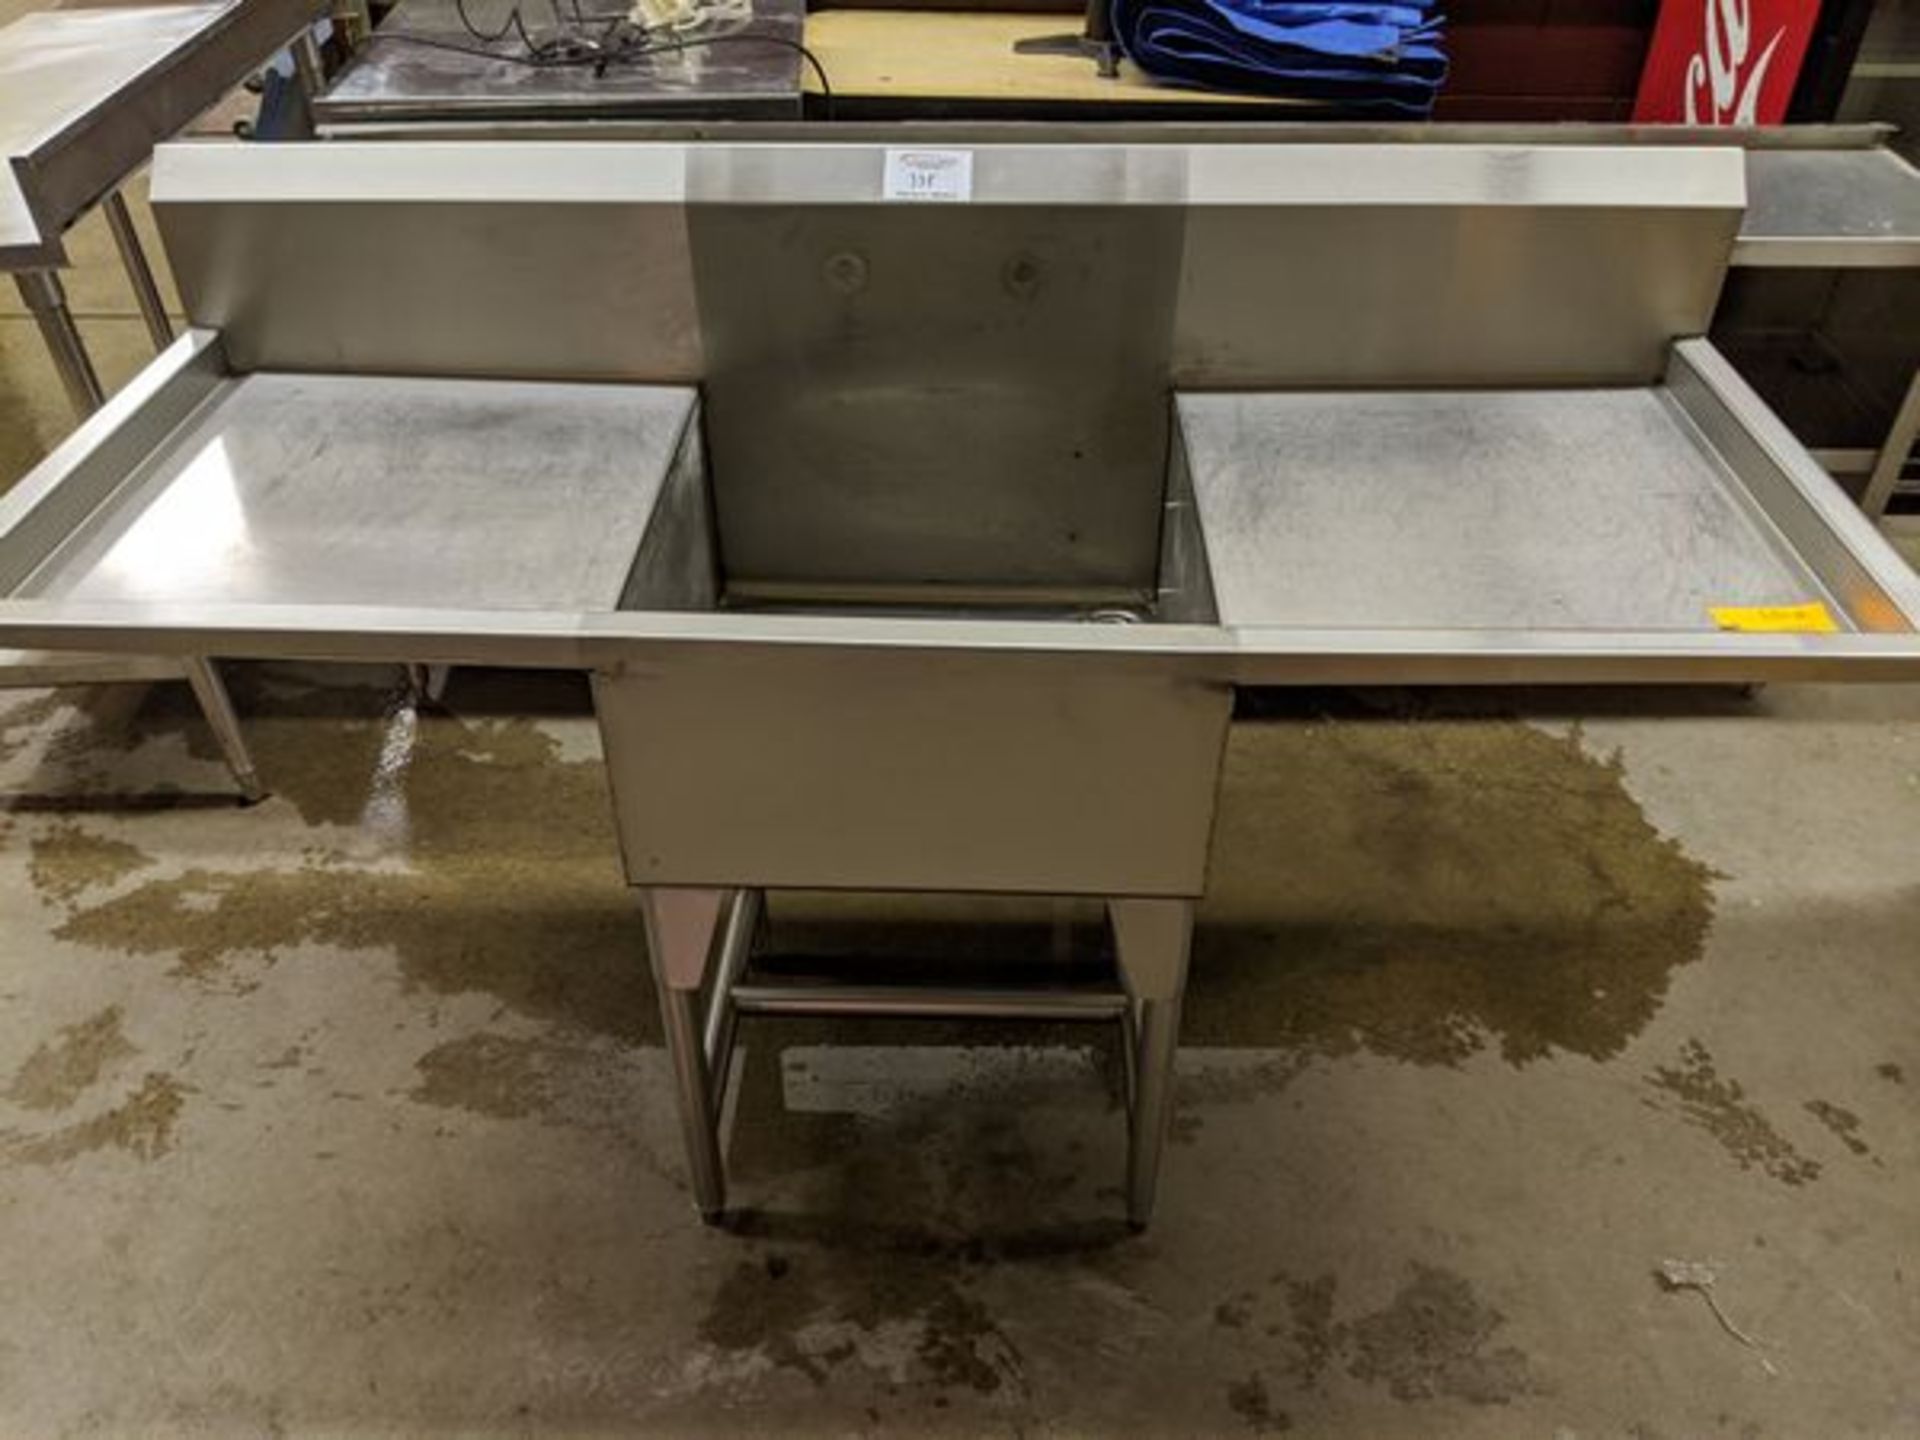 Single Well Stainless Steel Sink with Left and Right Runoffs